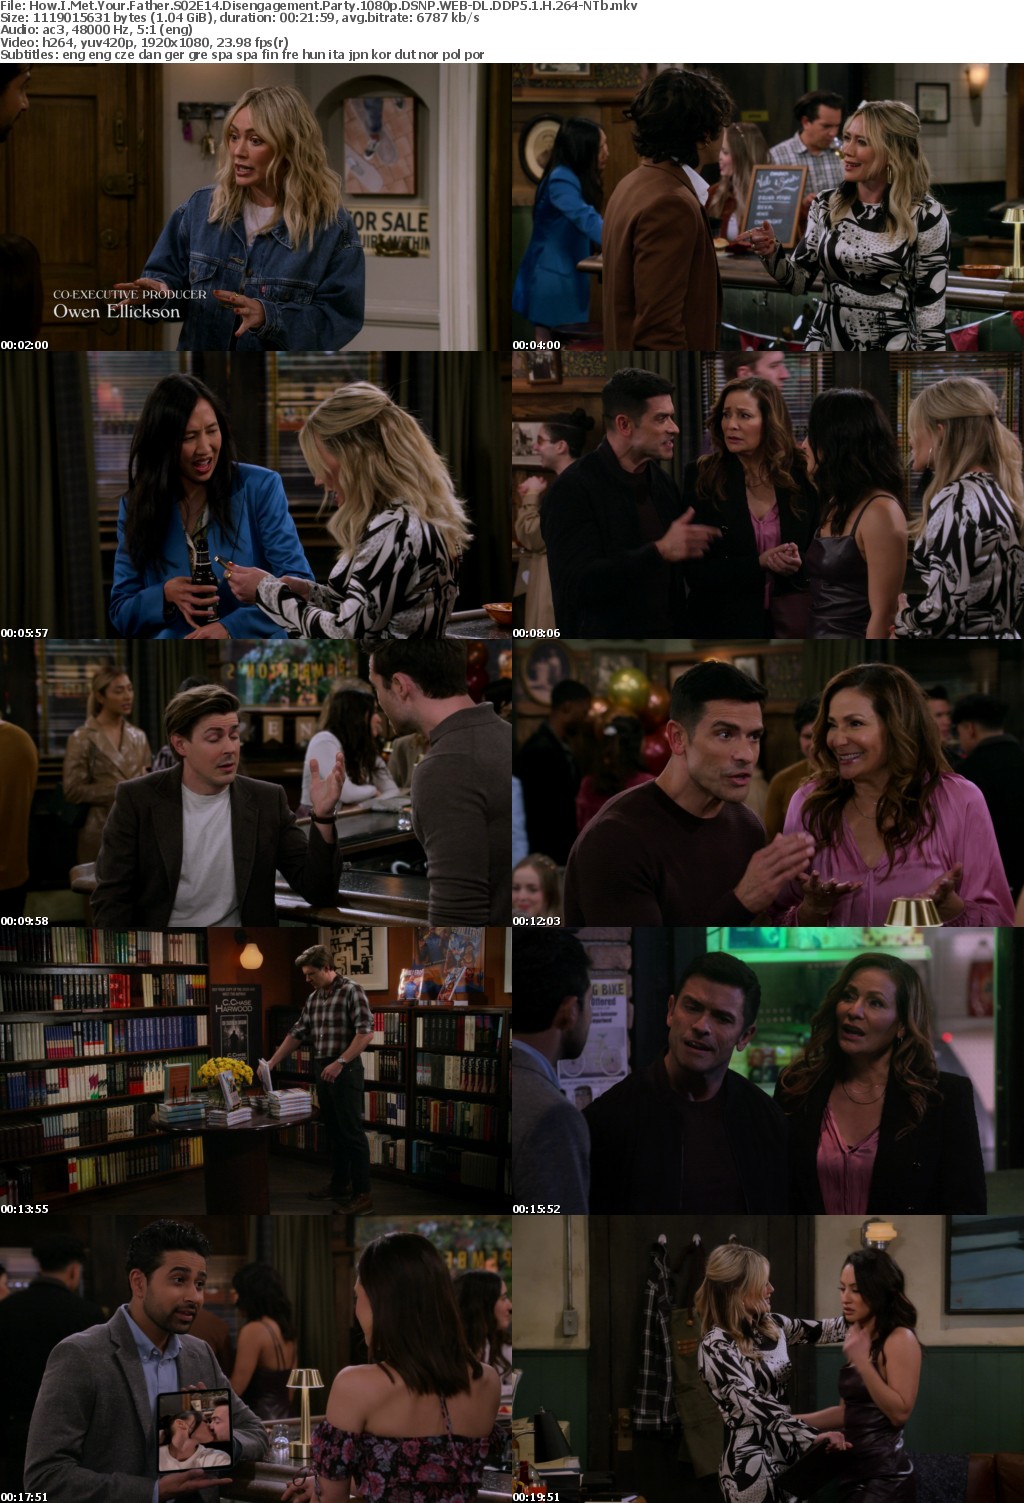 How I Met Your Father S02E14 Disengagement Party 1080p DSNP WEB-DL DDP5 1 H 264-NTb